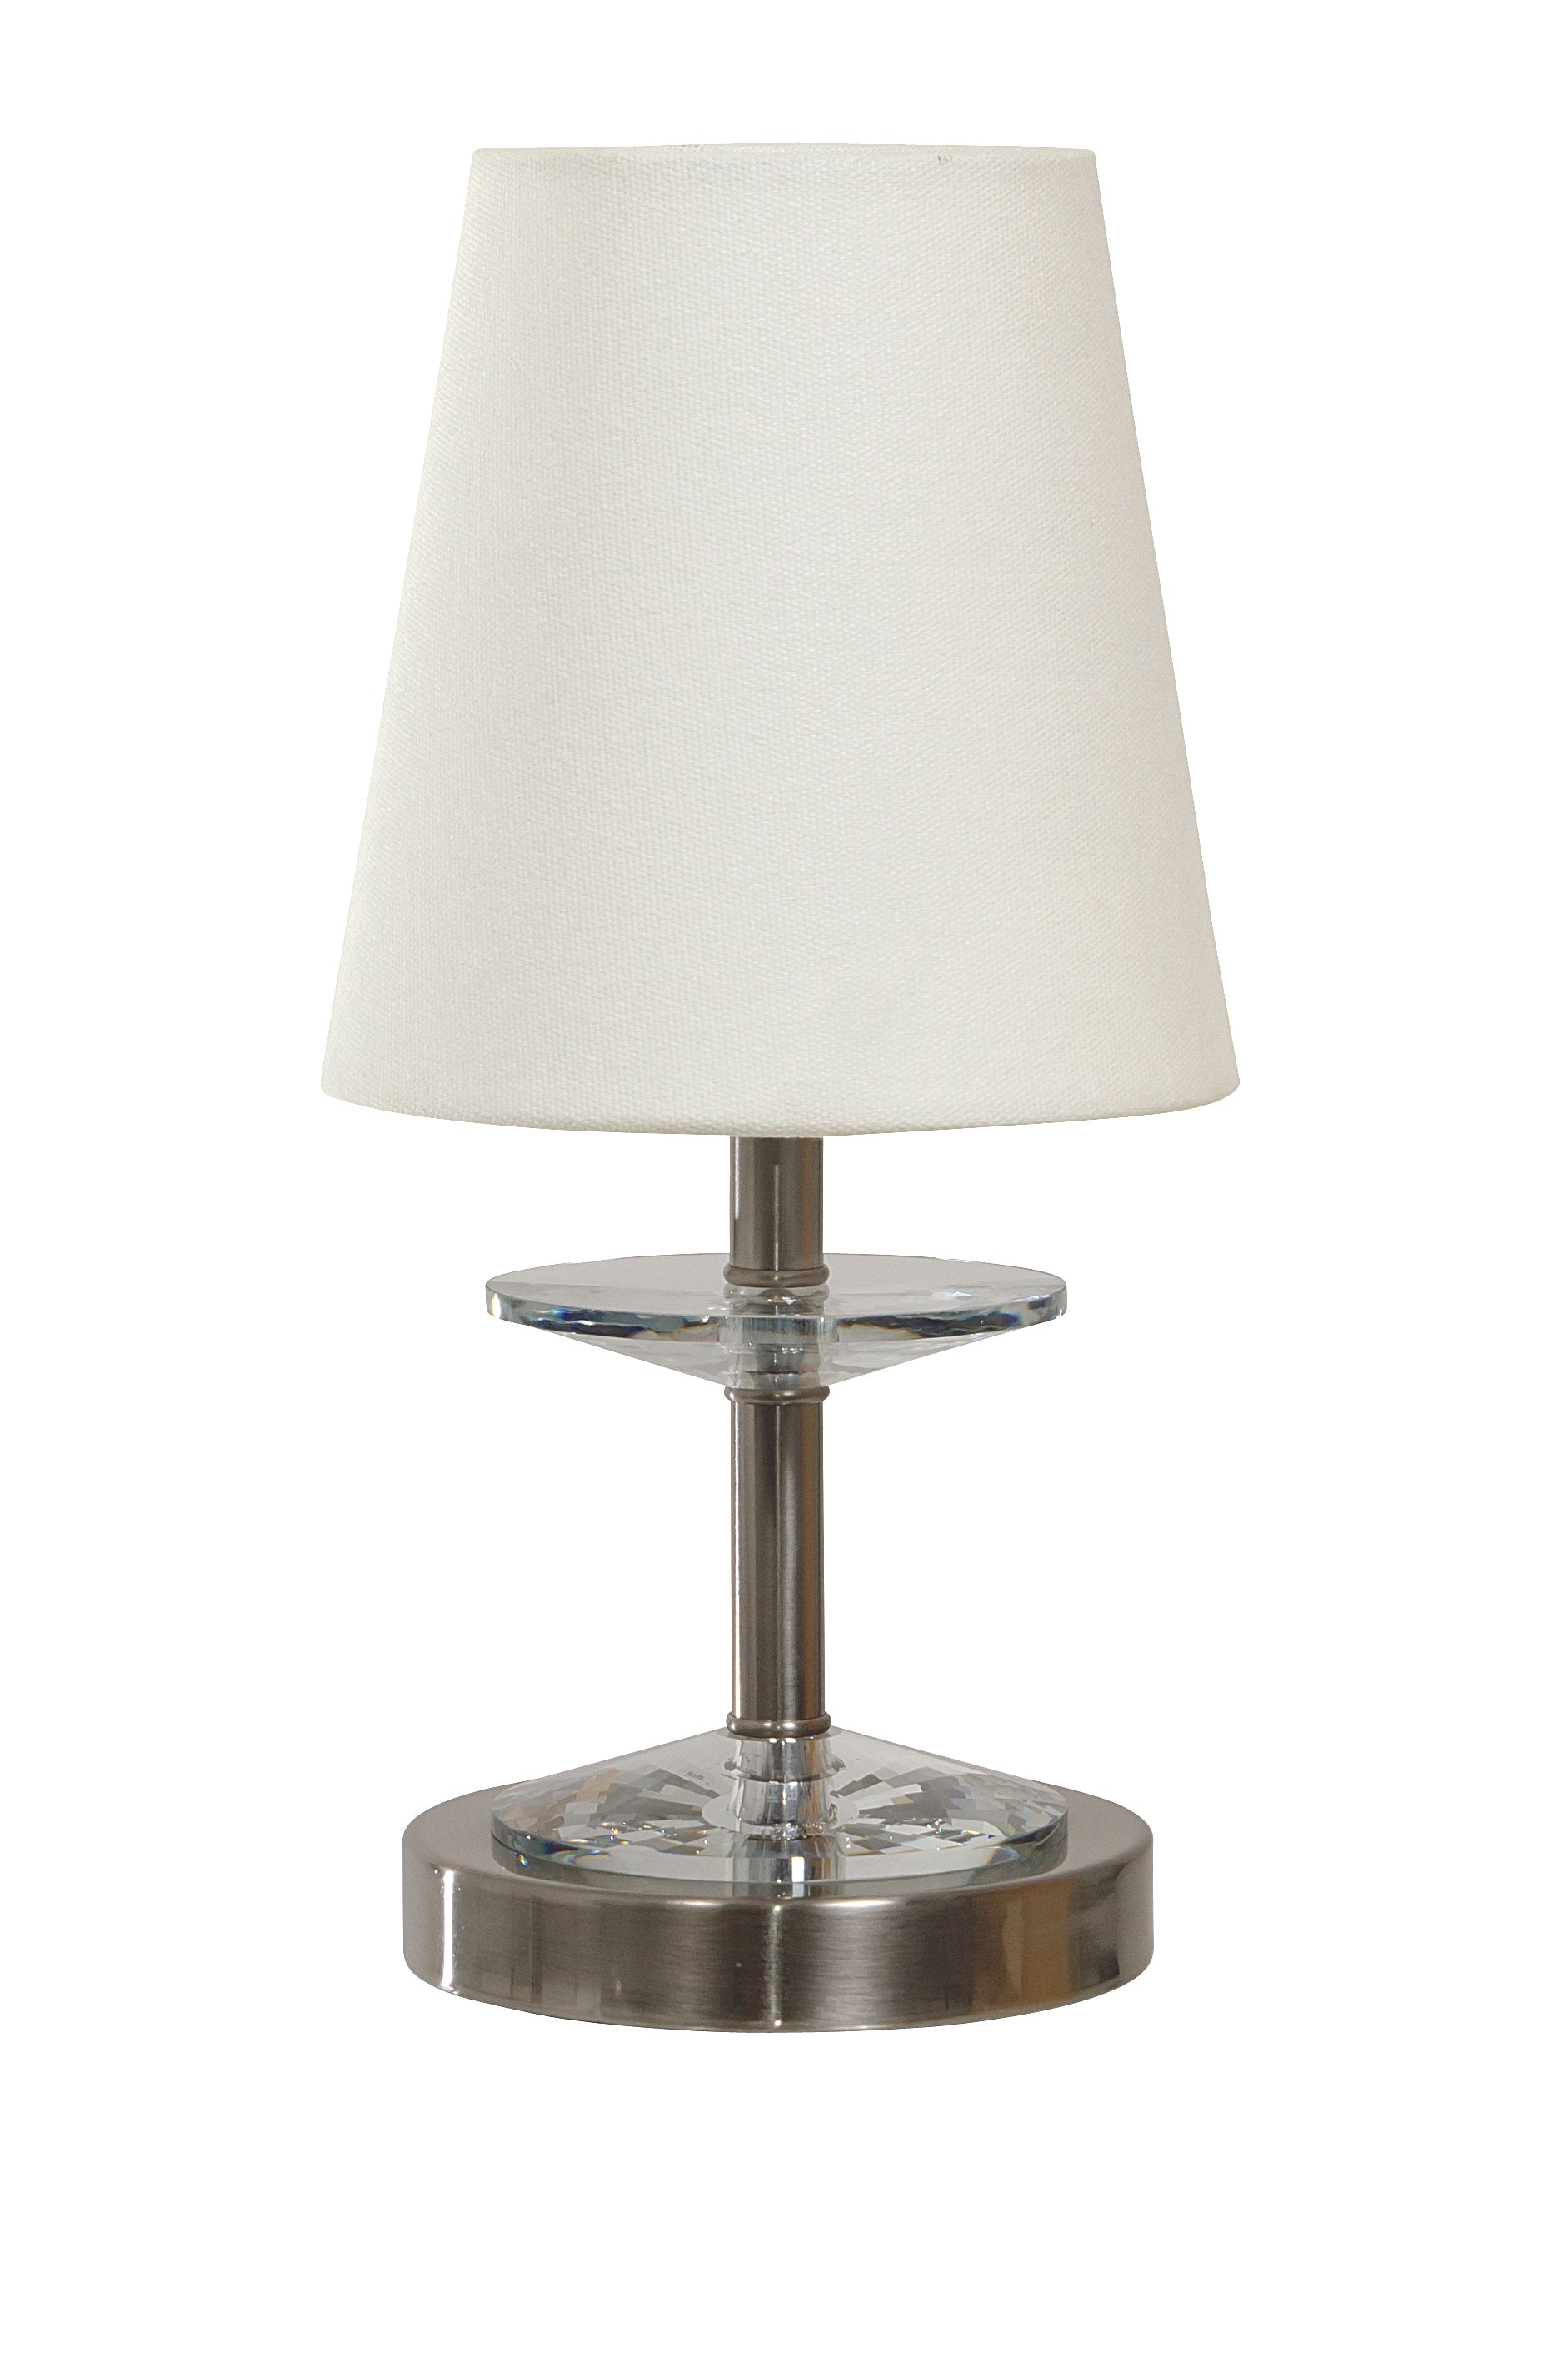 House of Troy Bryson Mini Crystal Disk Satin Nickel Accent Lamp B204-SN